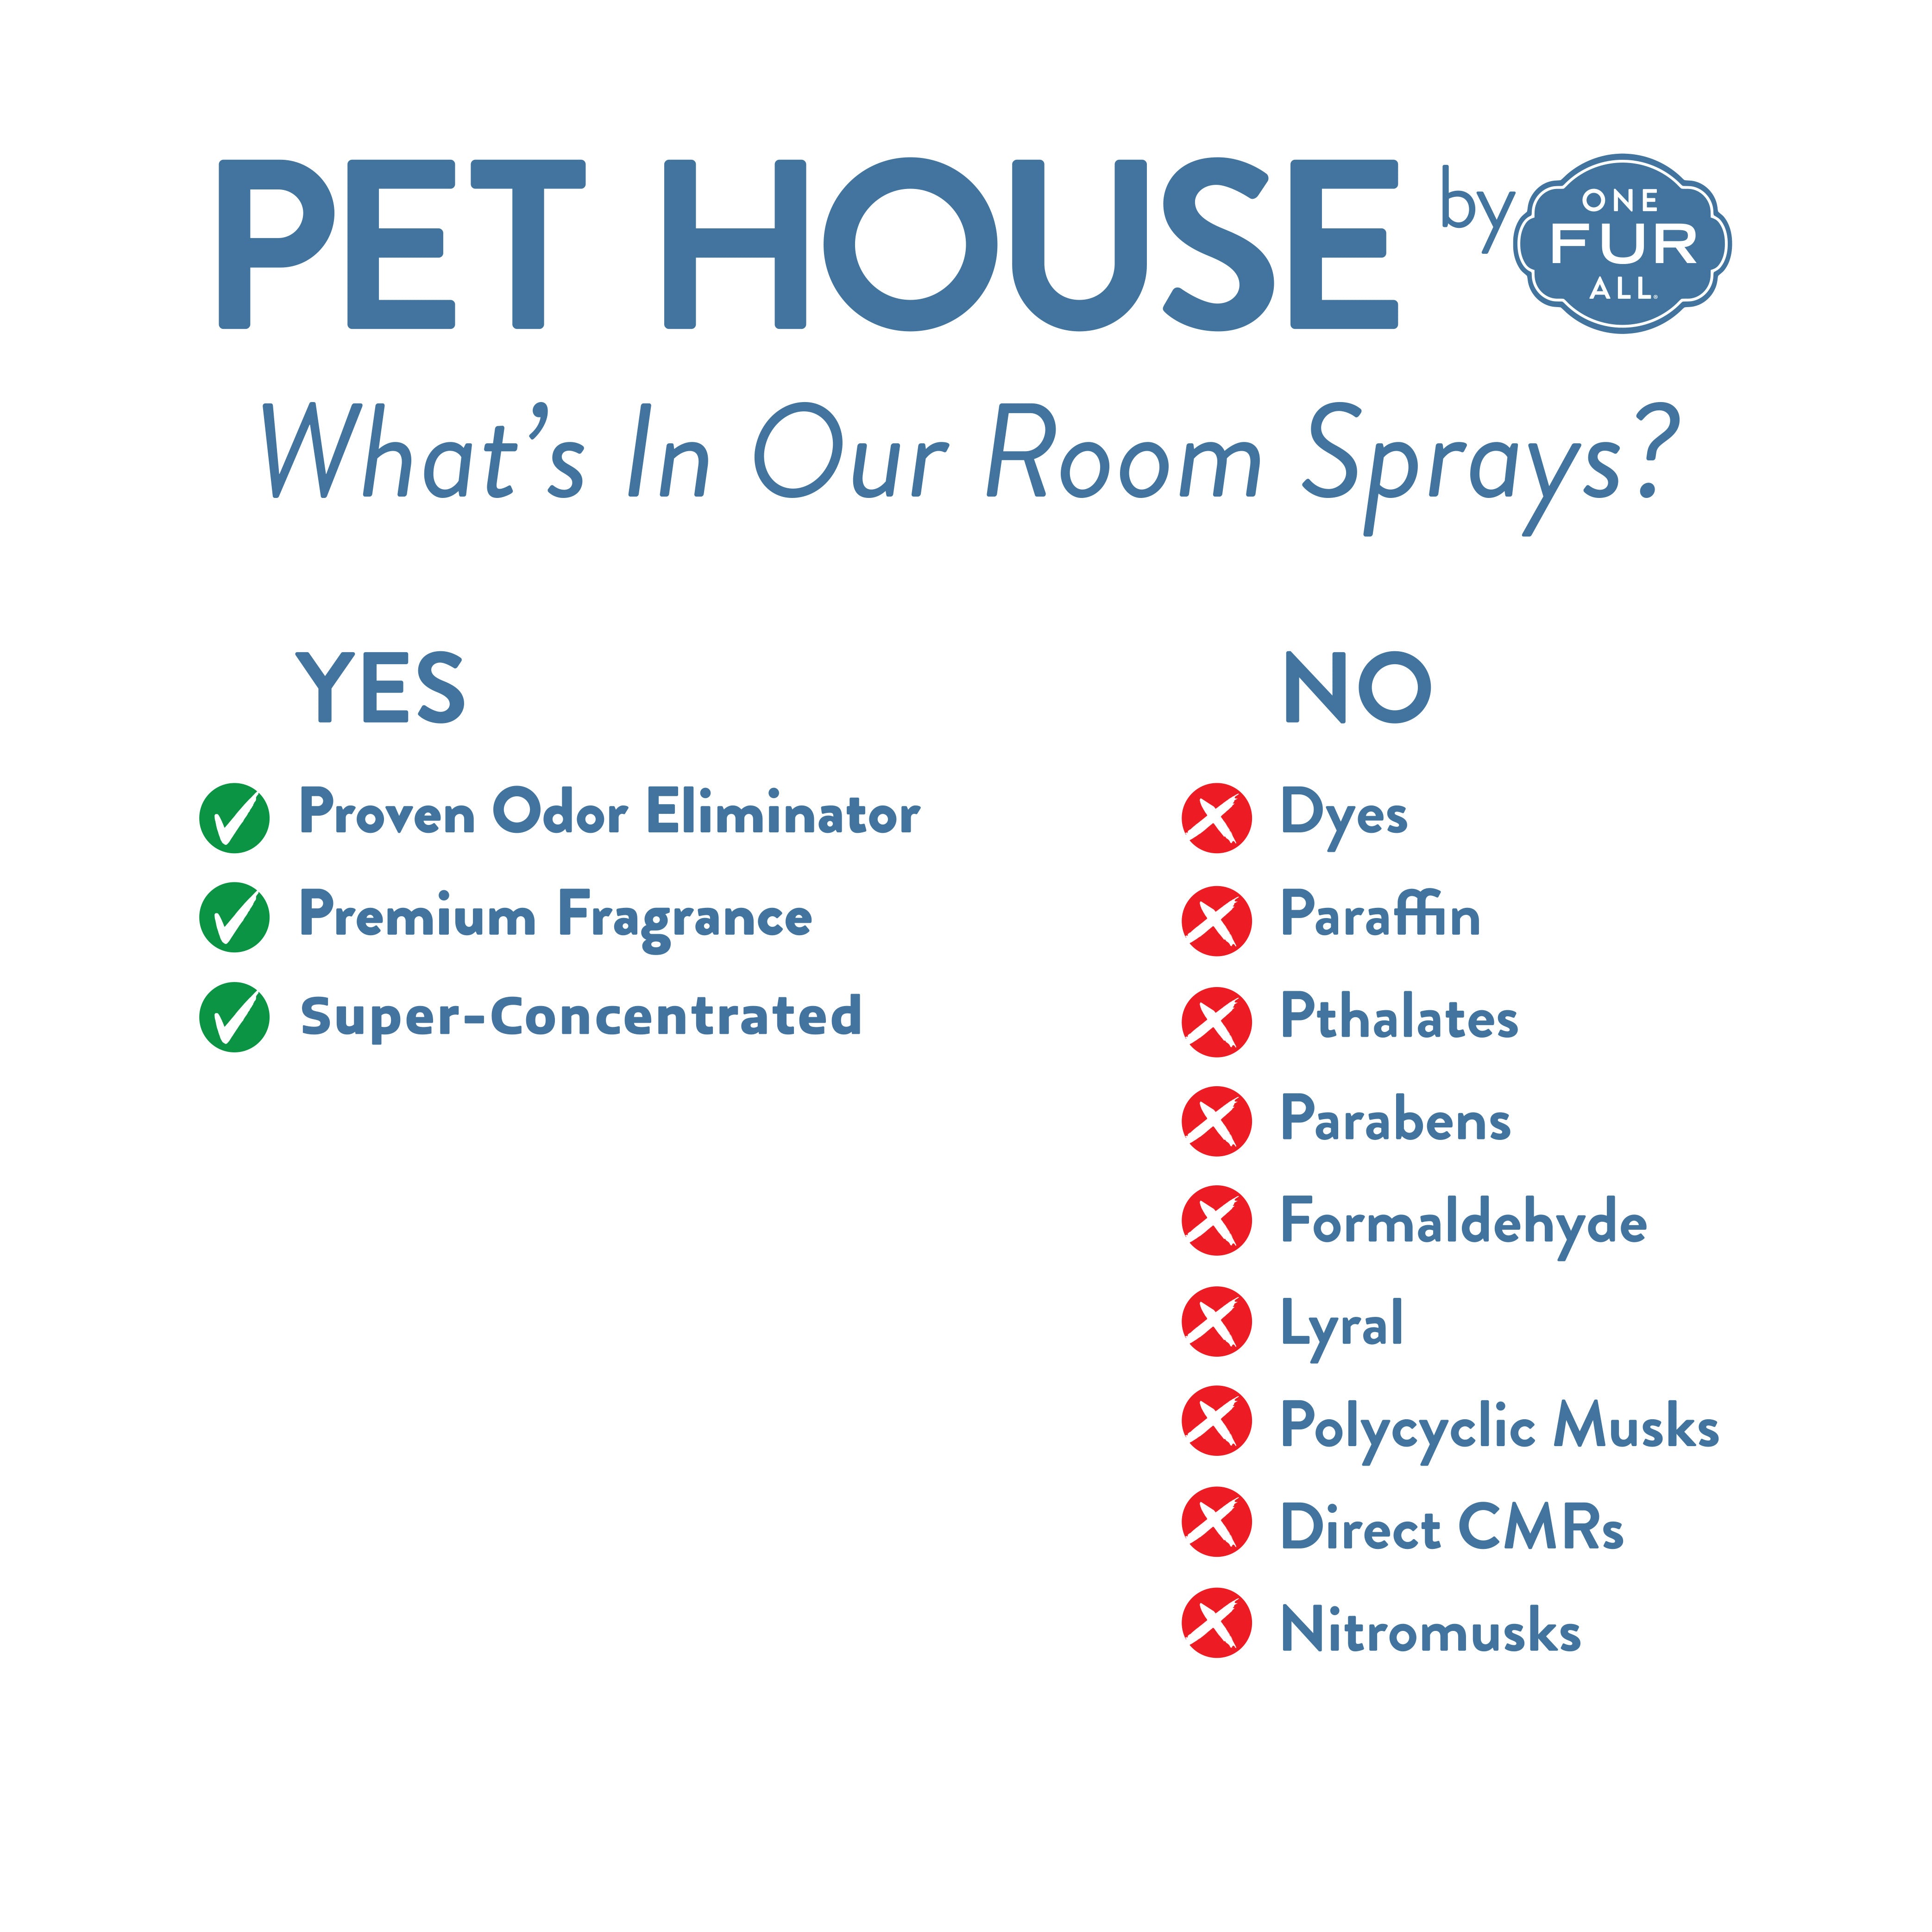 What's in our Room Sprays